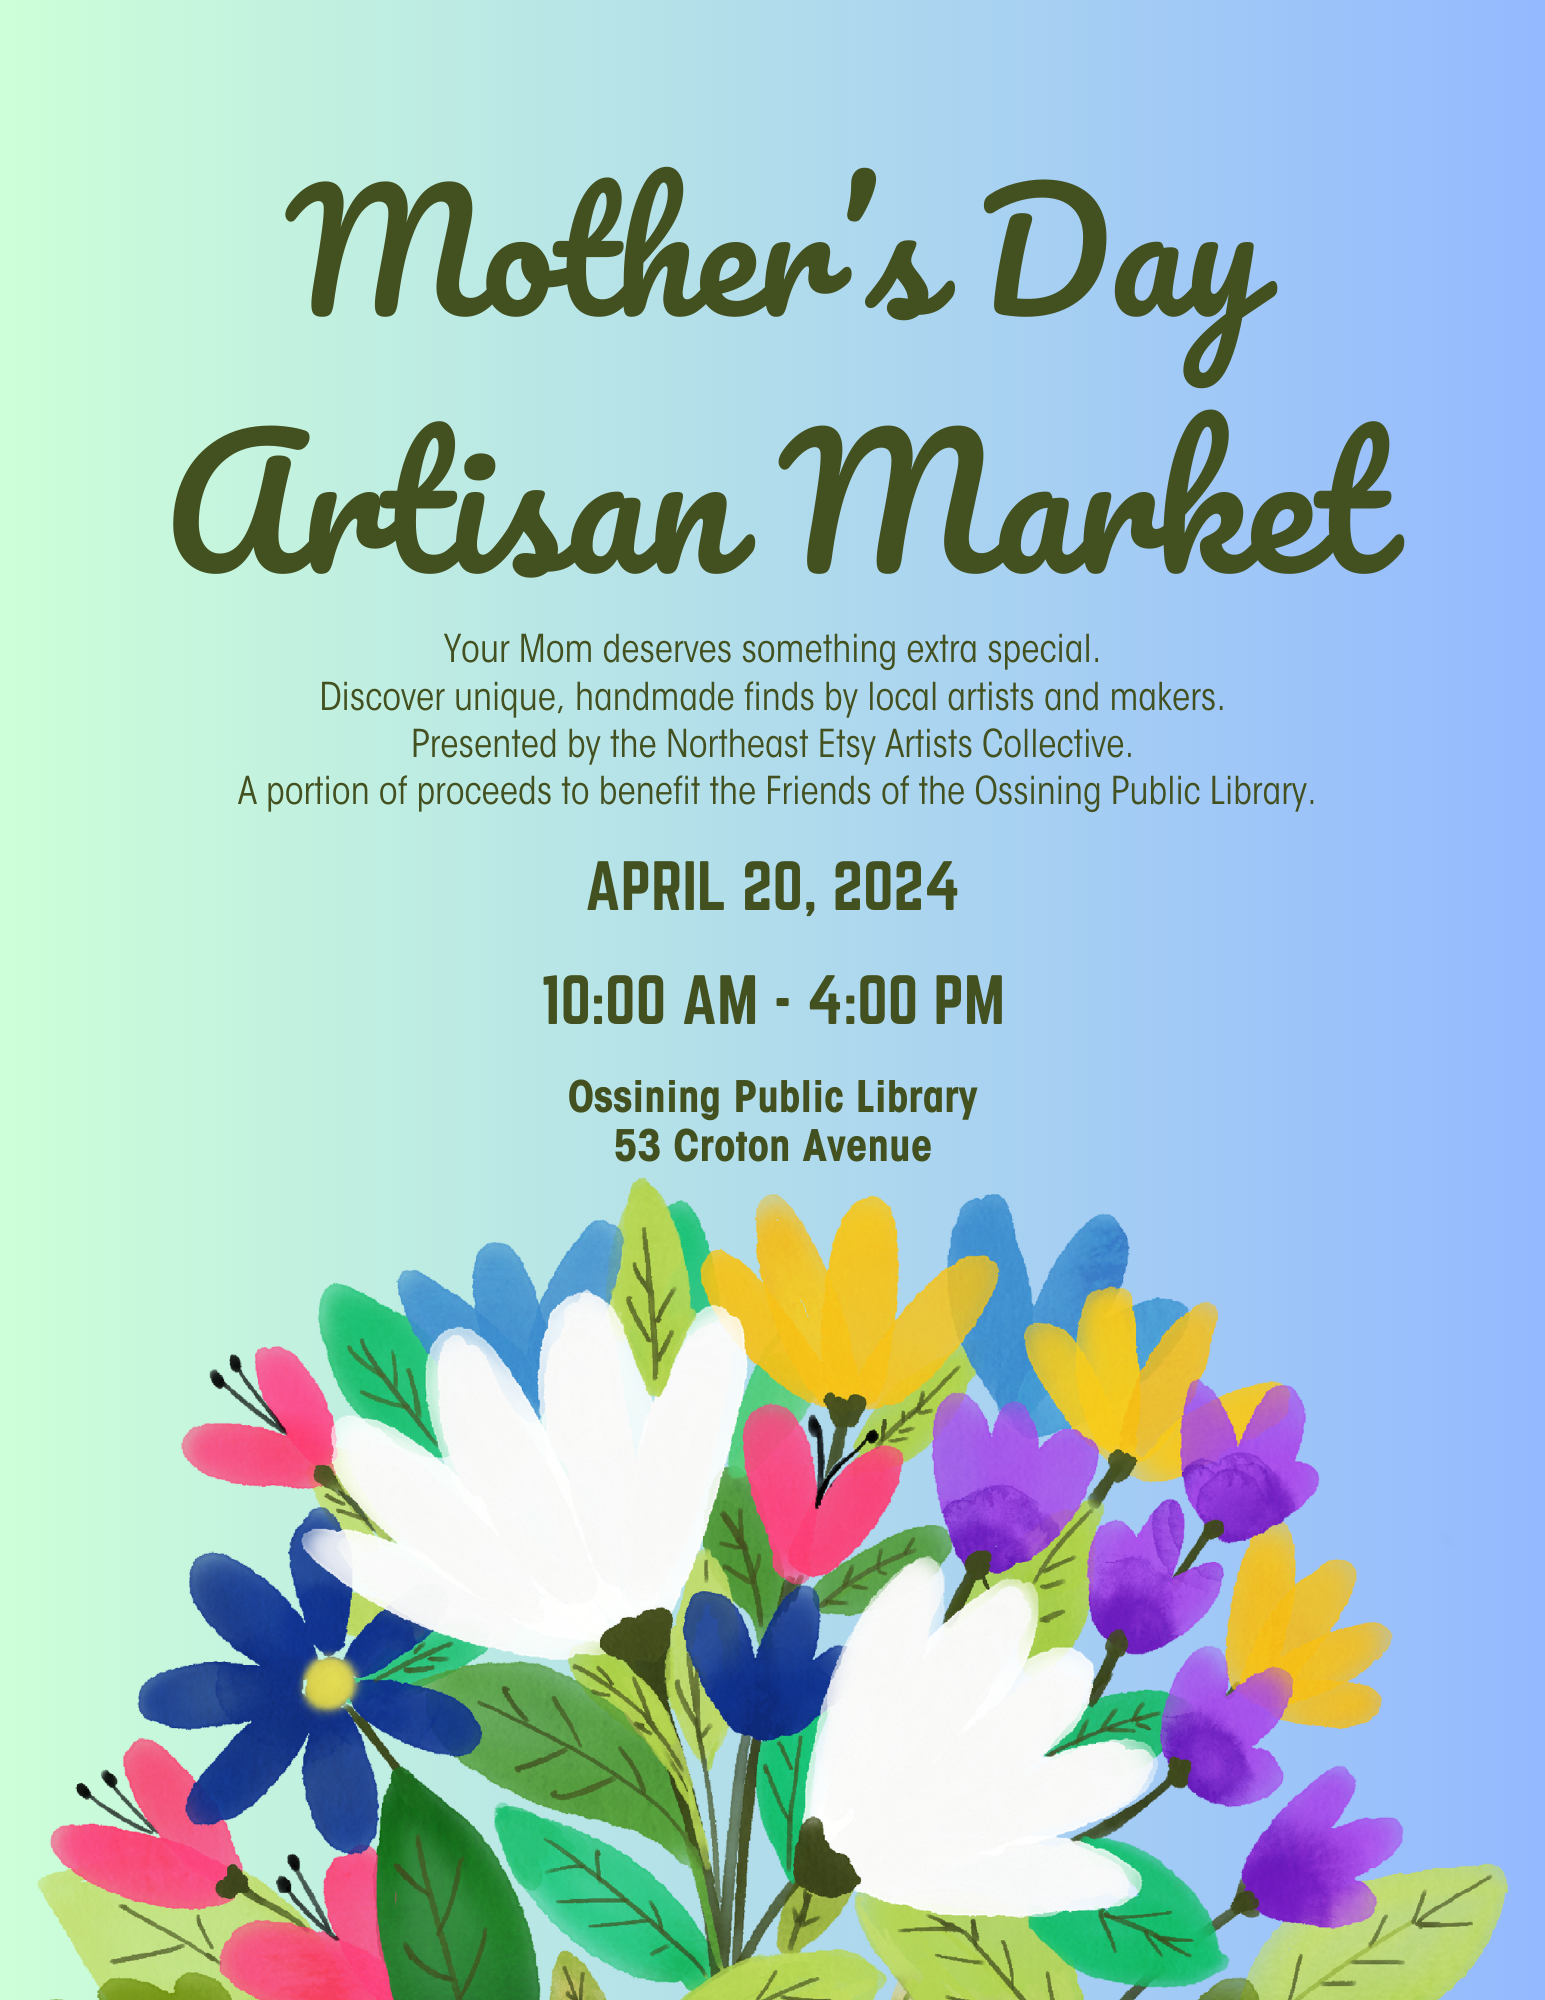 Flier with colorful flowers and blue and green background.